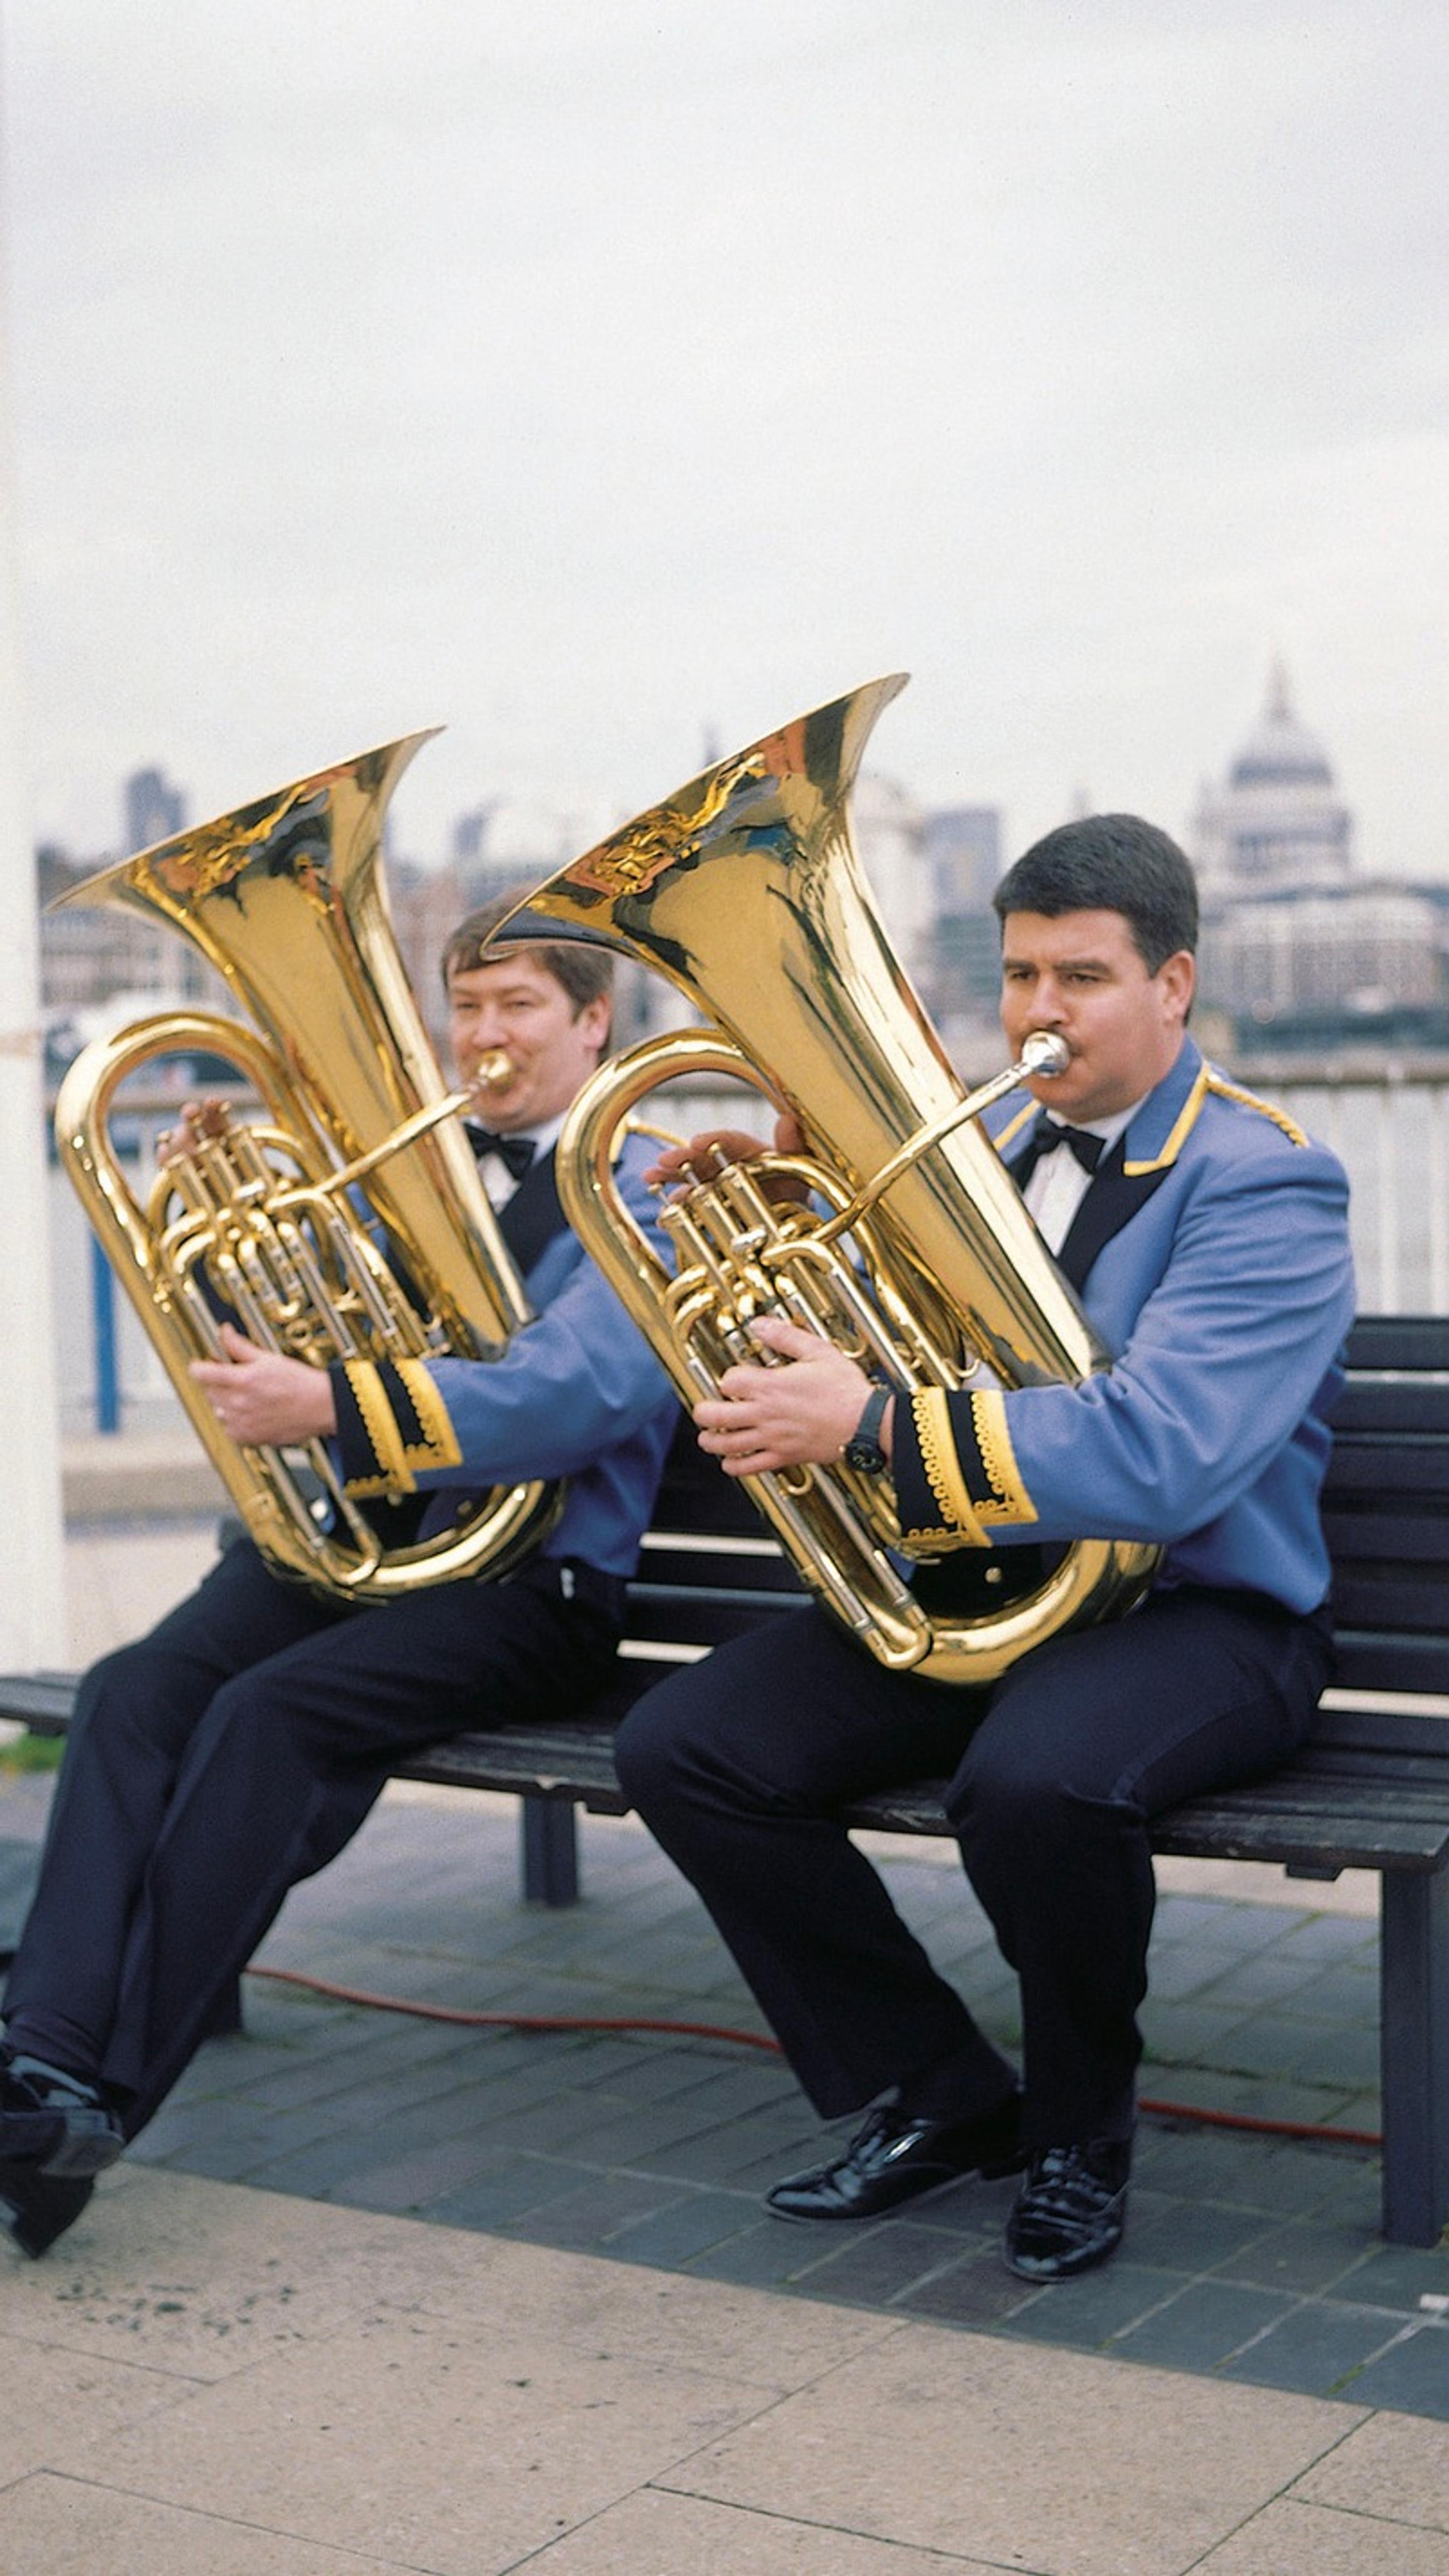 Two men in matching uniforms sit outside on a bench, each playing a tuba